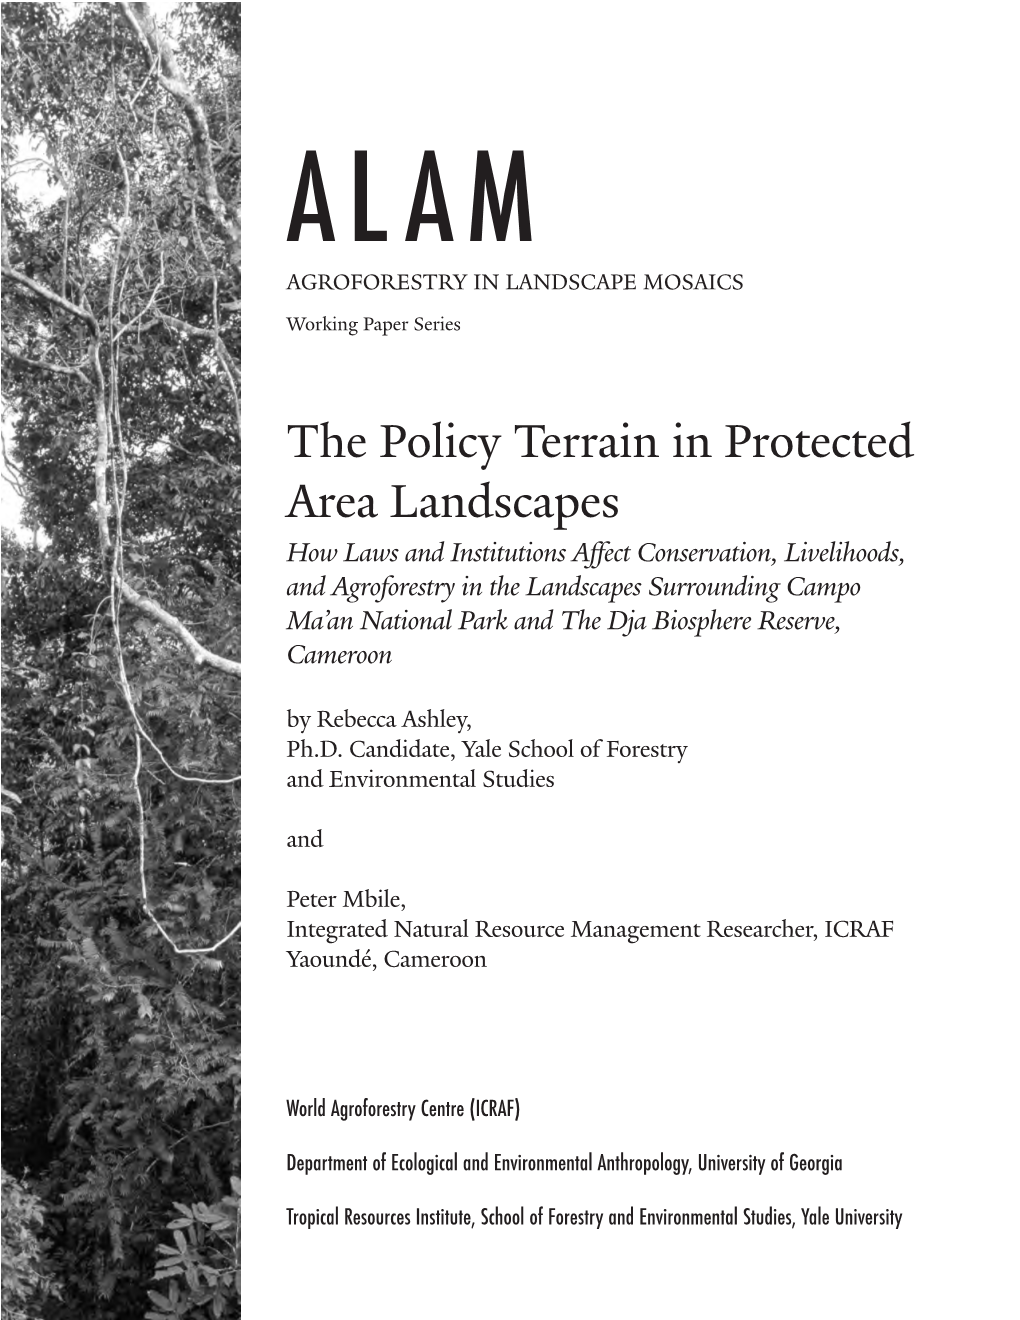 The Policy Terrain in Protected Area Landscapes